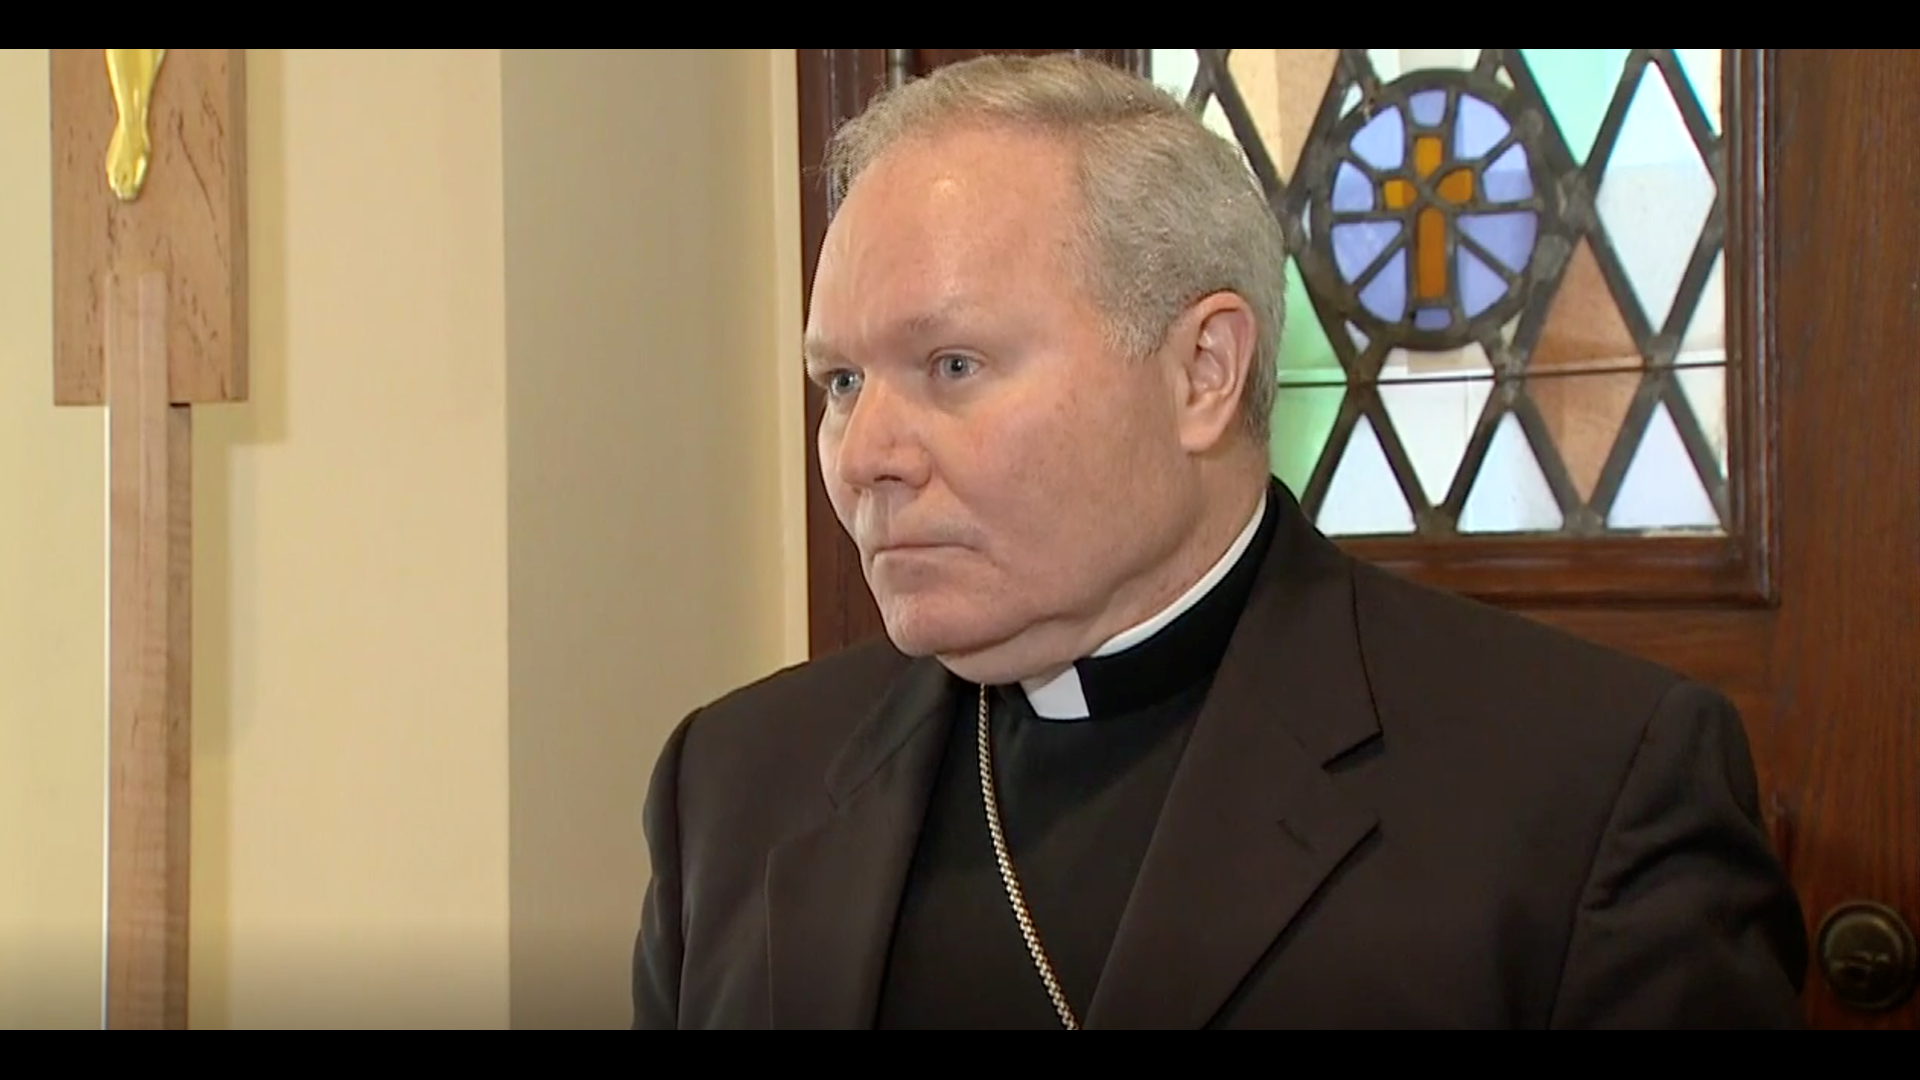 The Catholic Diocese of Dallas faces investigation of priests accused of sexual abuse. Bishop Edward Burns spoke after Dallas police serve a search warrant on the diocese.